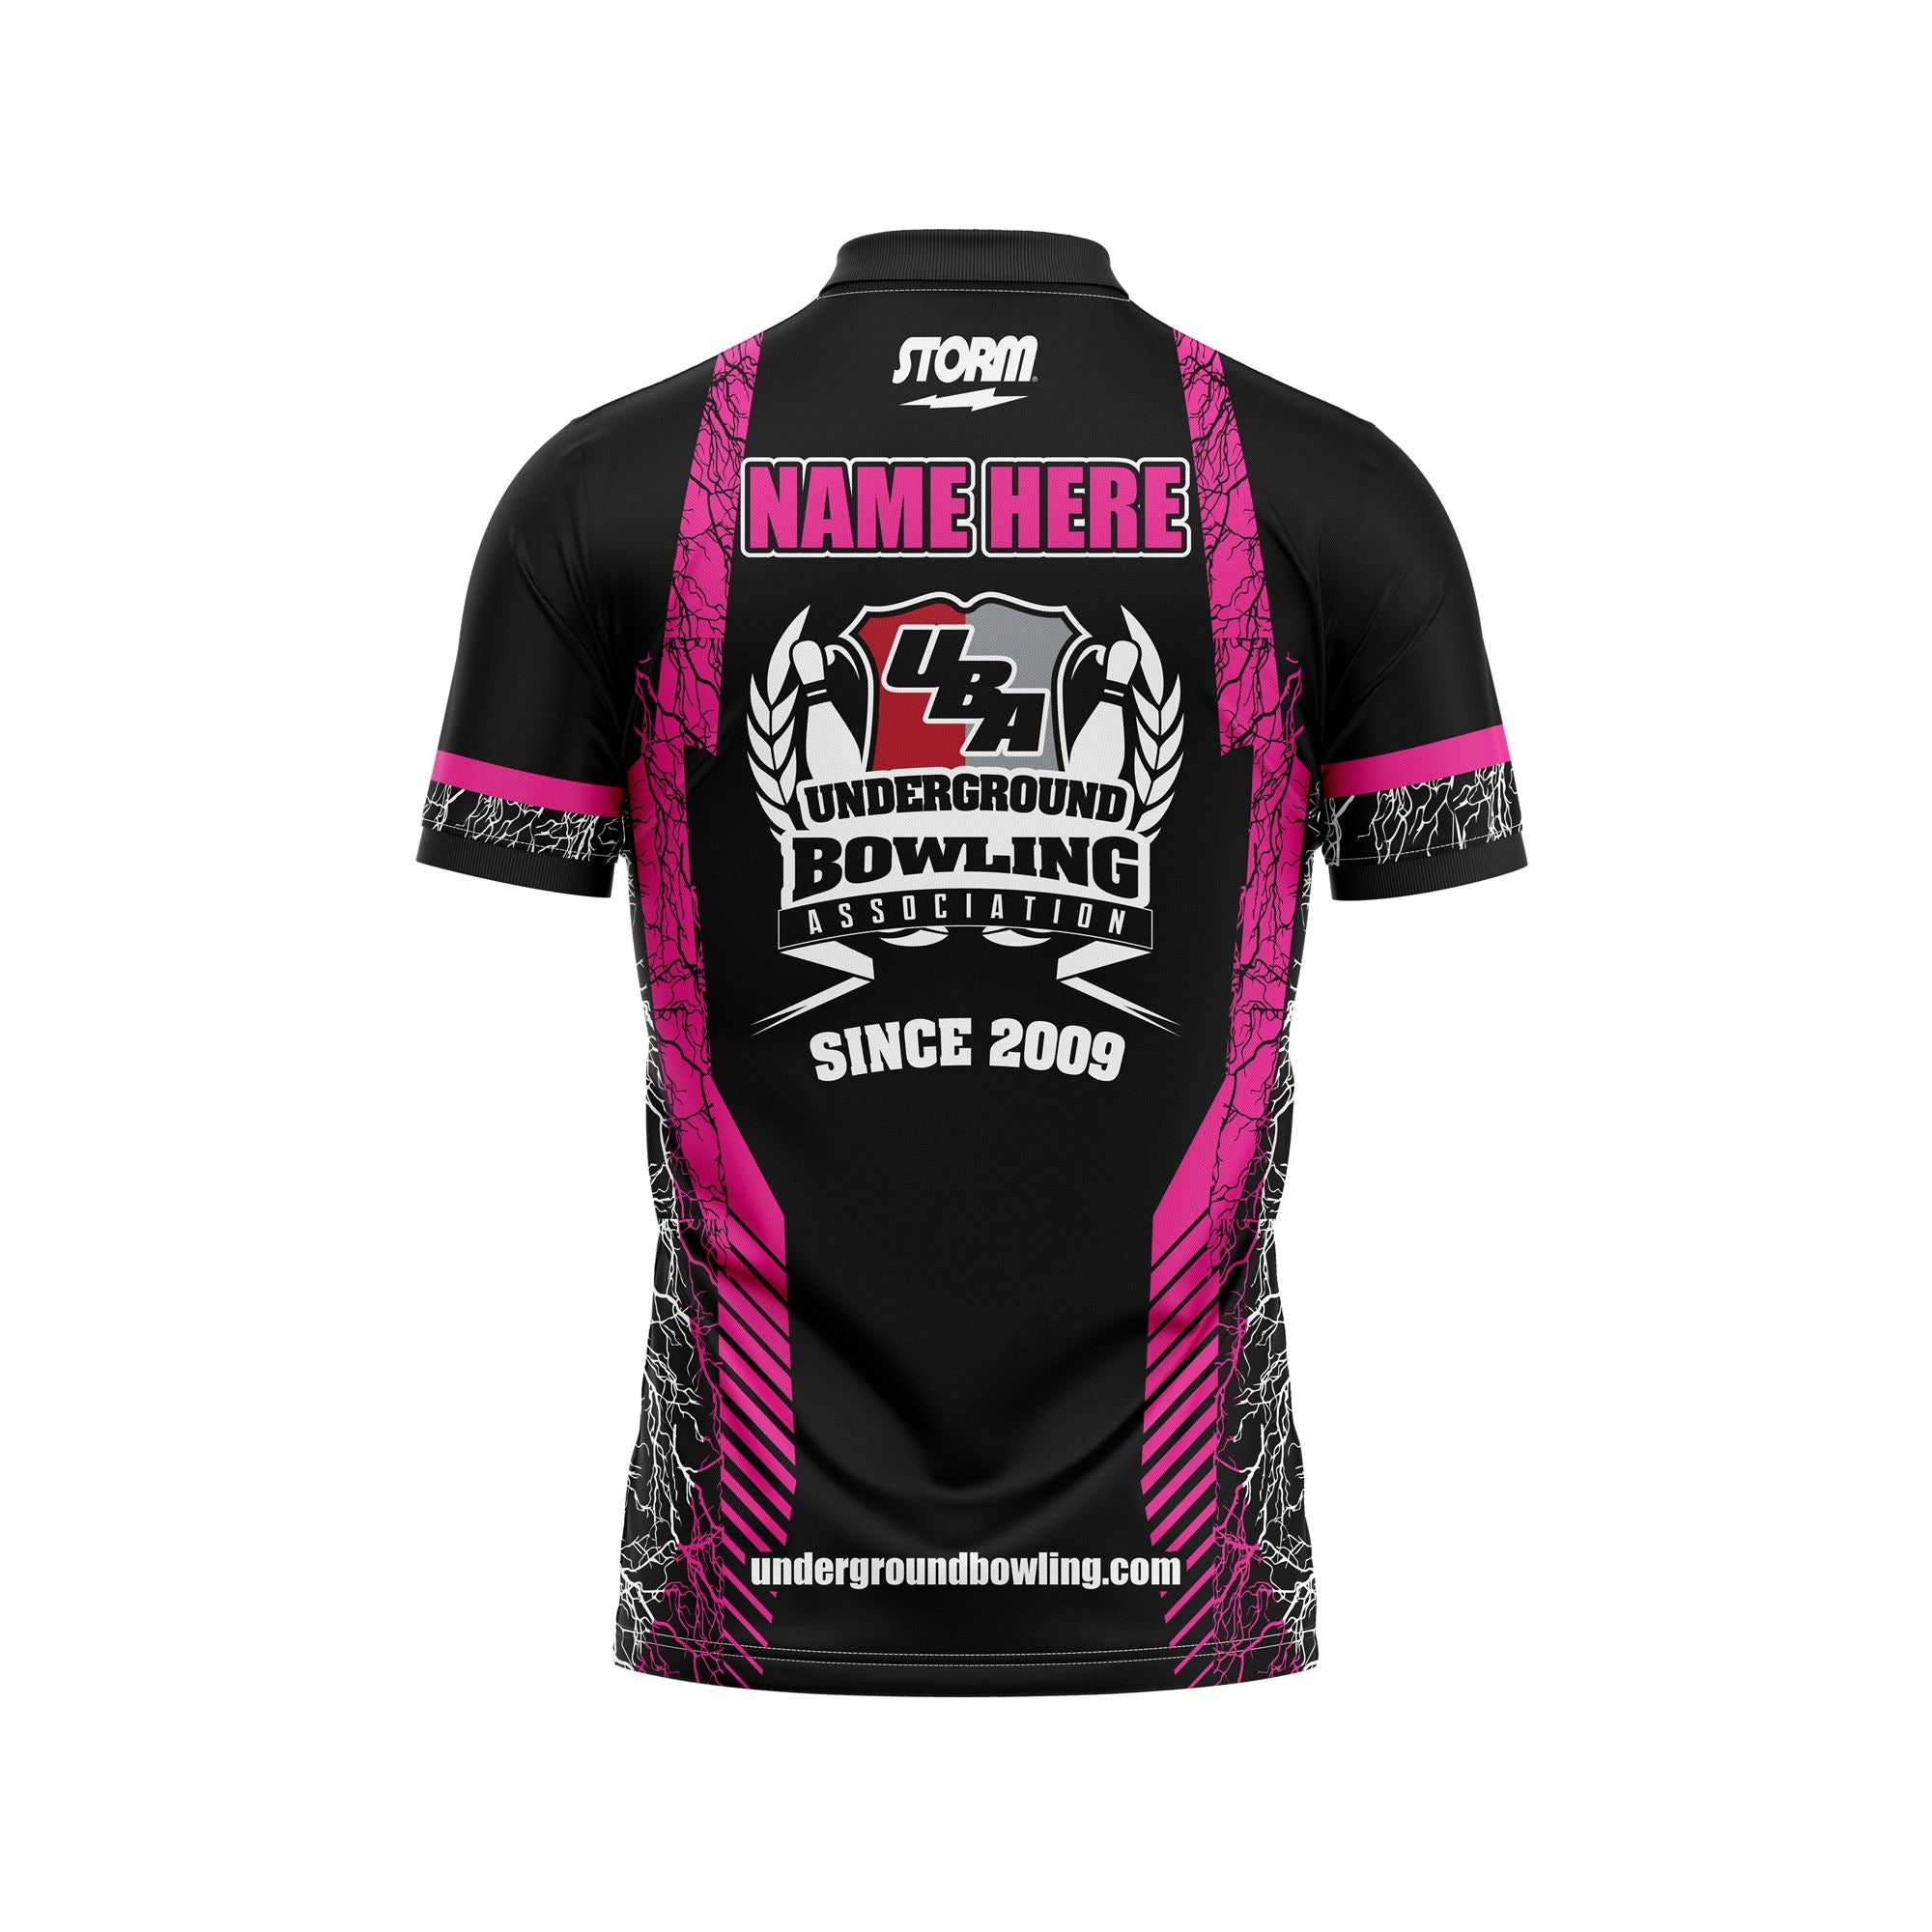 The Tribe Breast Cancer Black Jersey